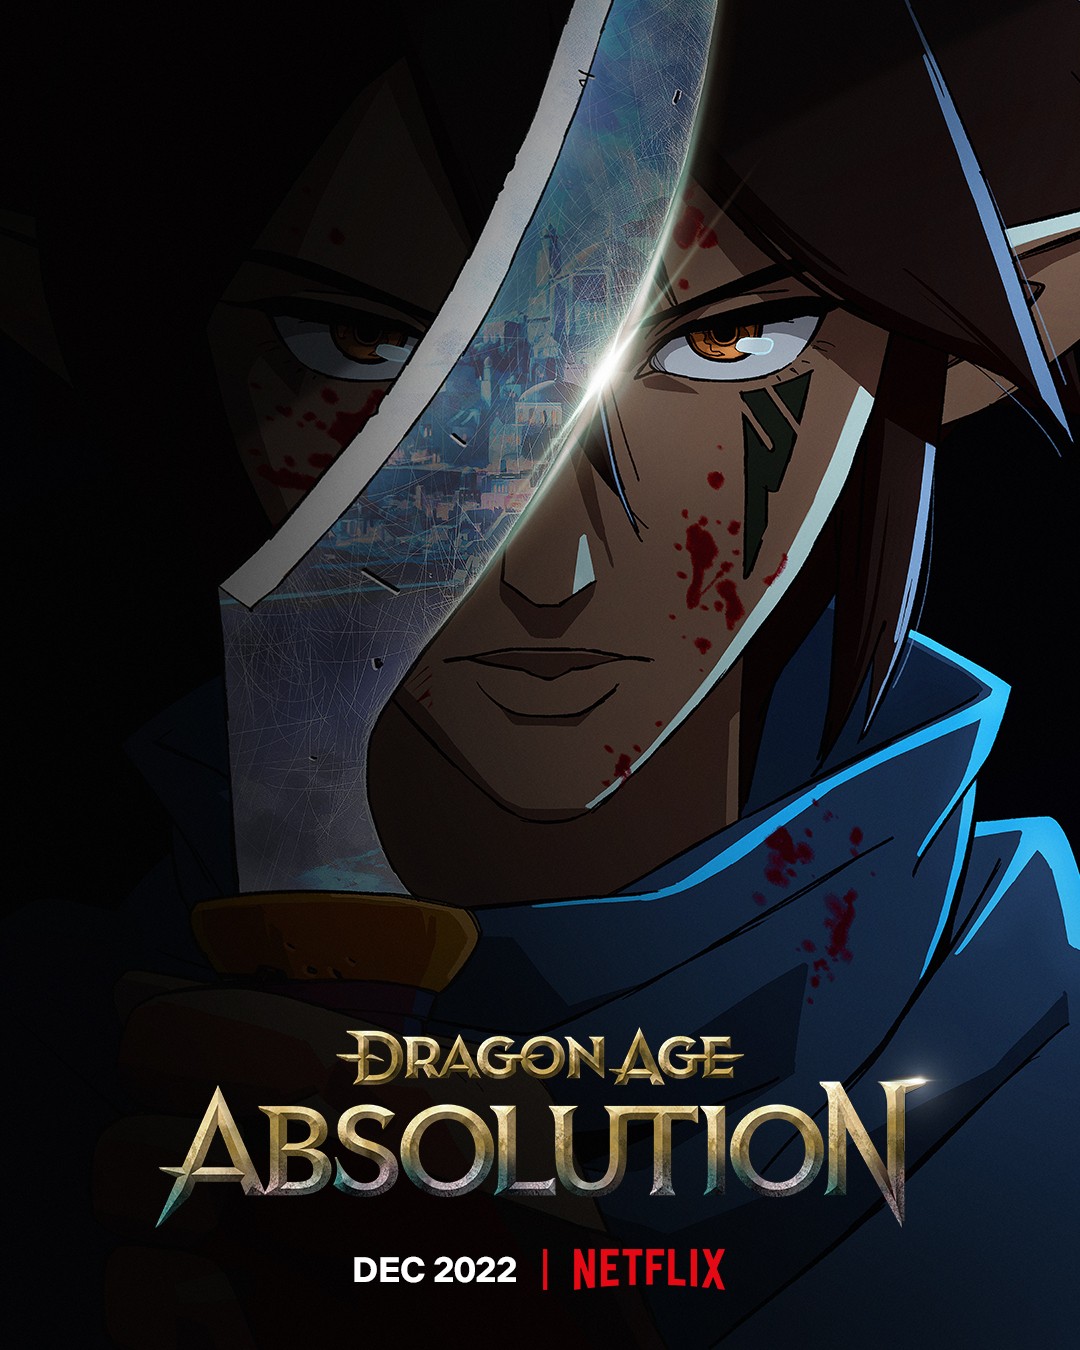 Dragon Age: Absolution from December available on Netflix